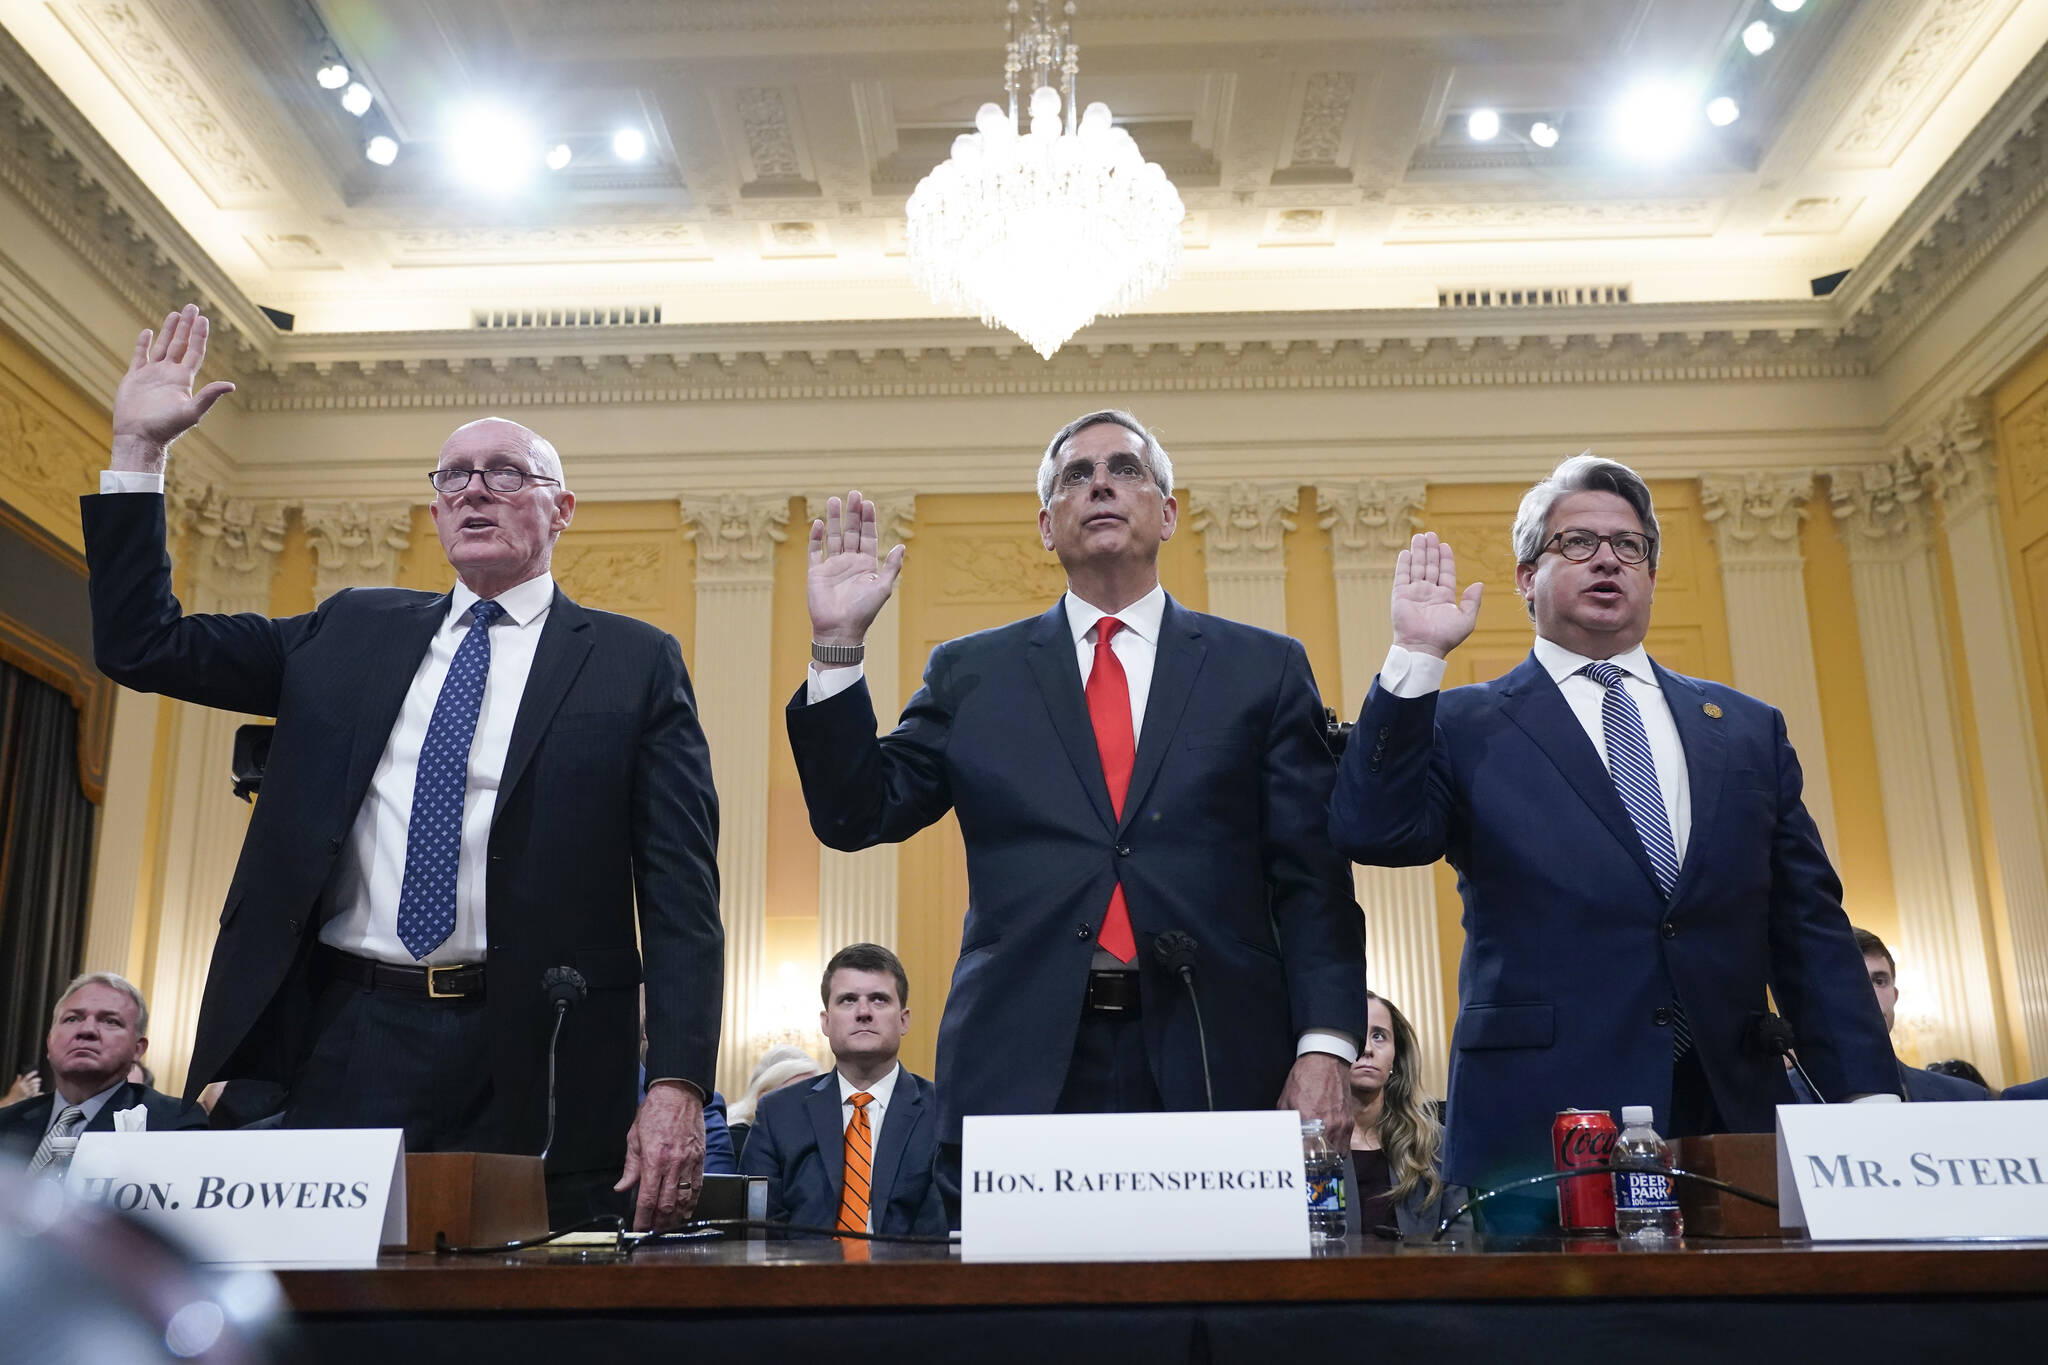 Rusty Bowers, Arizona state House Speaker, from left, Brad Raffensperger, Georgia Secretary of State, and Gabe Sterling, Georgia Deputy Secretary of State, are sworn in to testify as the House select committee investigating the Jan. 6 attack on the U.S. Capitol continues to reveal its findings of a year-long investigation, at the Capitol in Washington, Tuesday, June 21, 2022. (AP Photo/Jacquelyn Martin)